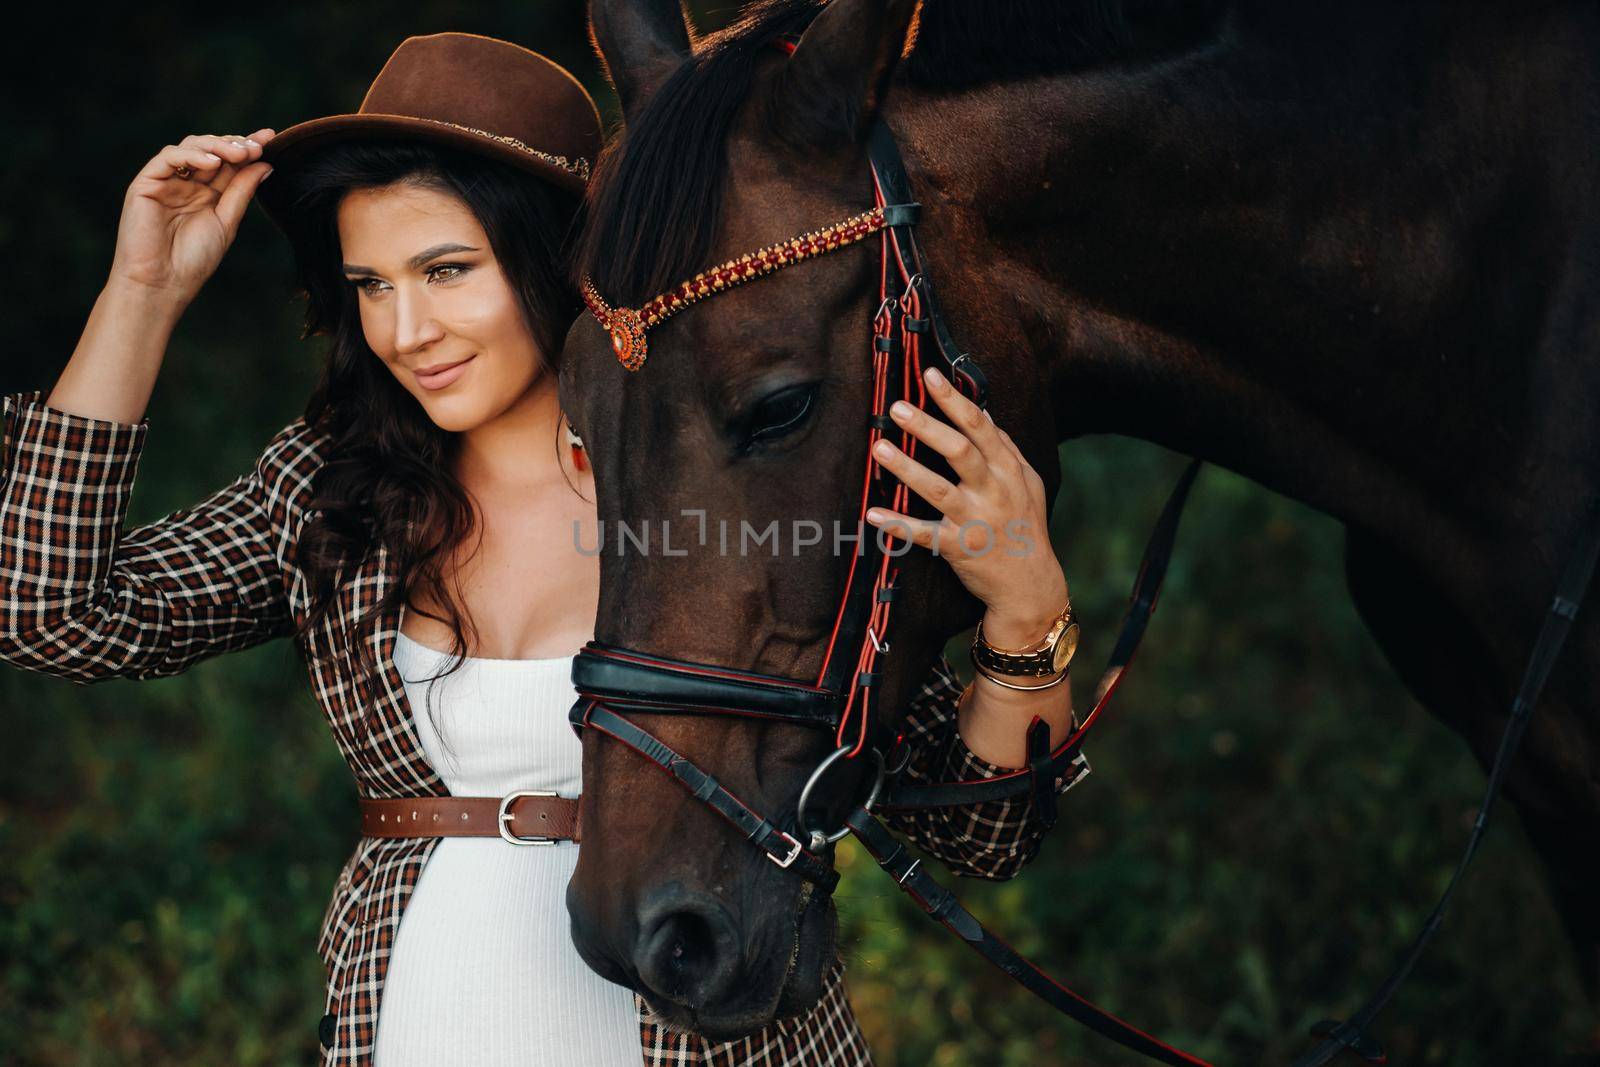 pregnant girl with a big belly in a hat next to horses in the forest in nature.Stylish girl in white clothes and a brown jacket